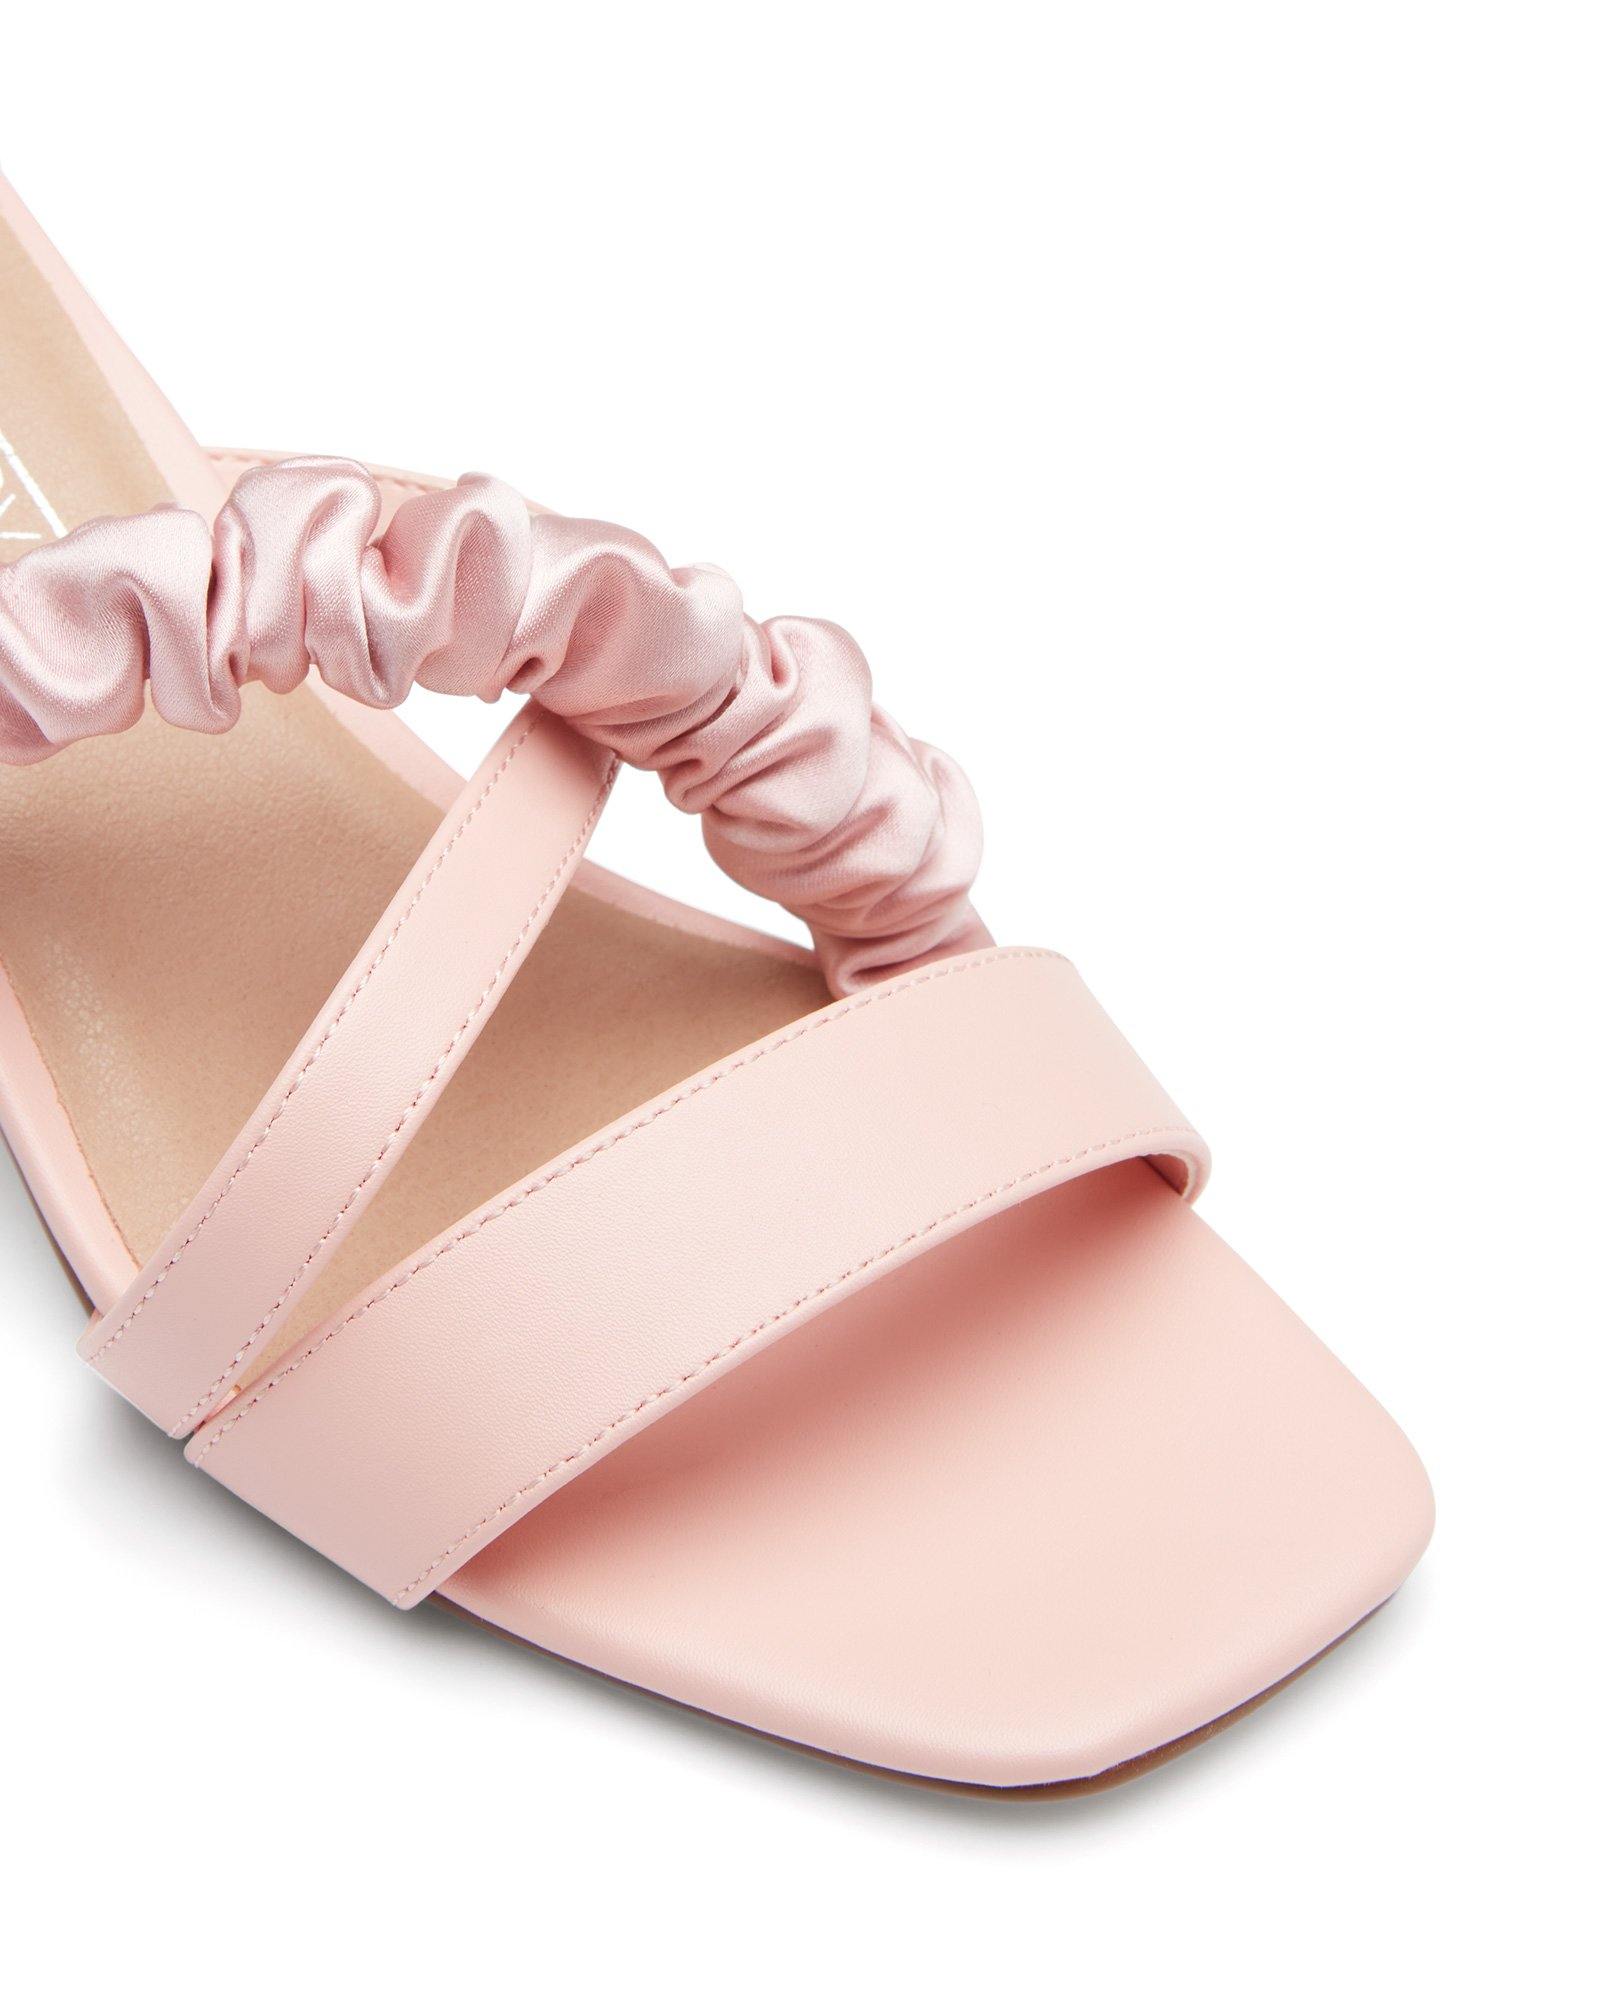 Potenza Pink - Therapy Shoes